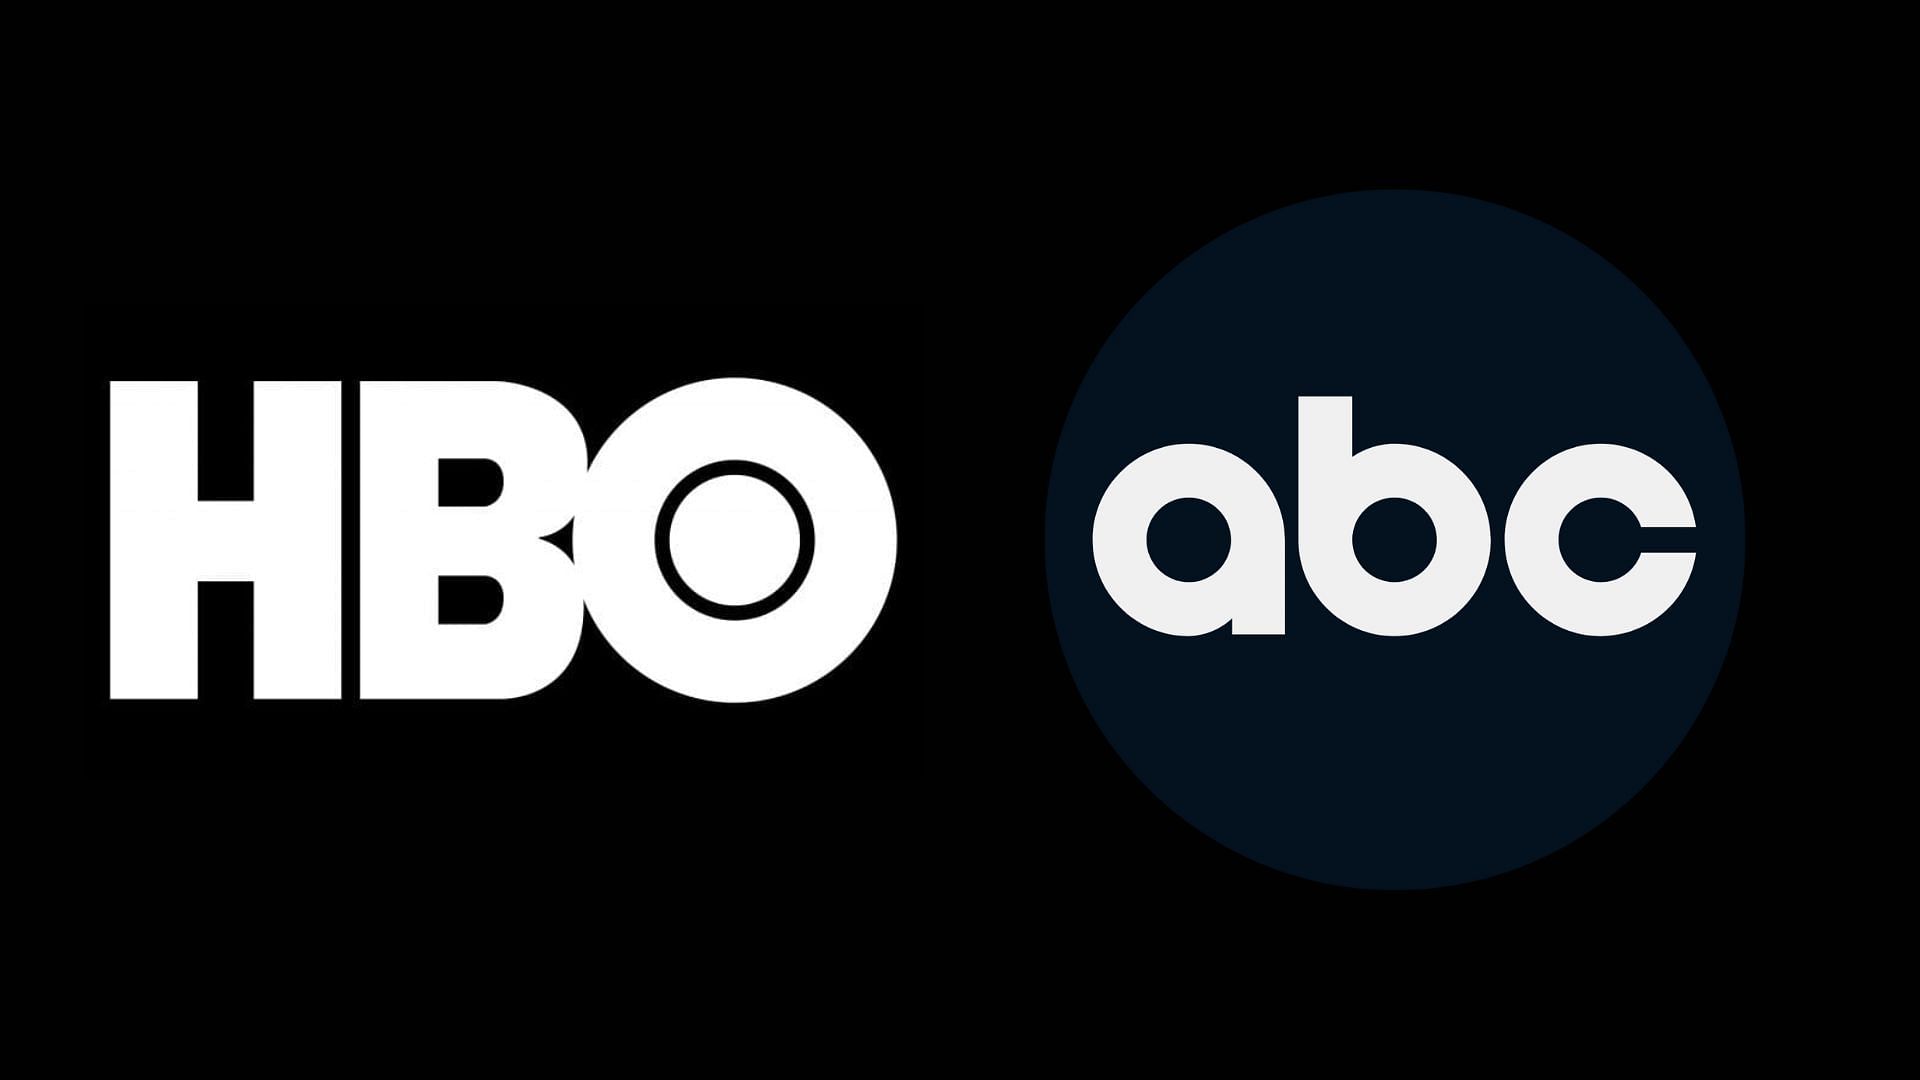 (L) HBO and (R) ABC are now both in the same prestigious position (Image via HBO and ABC)